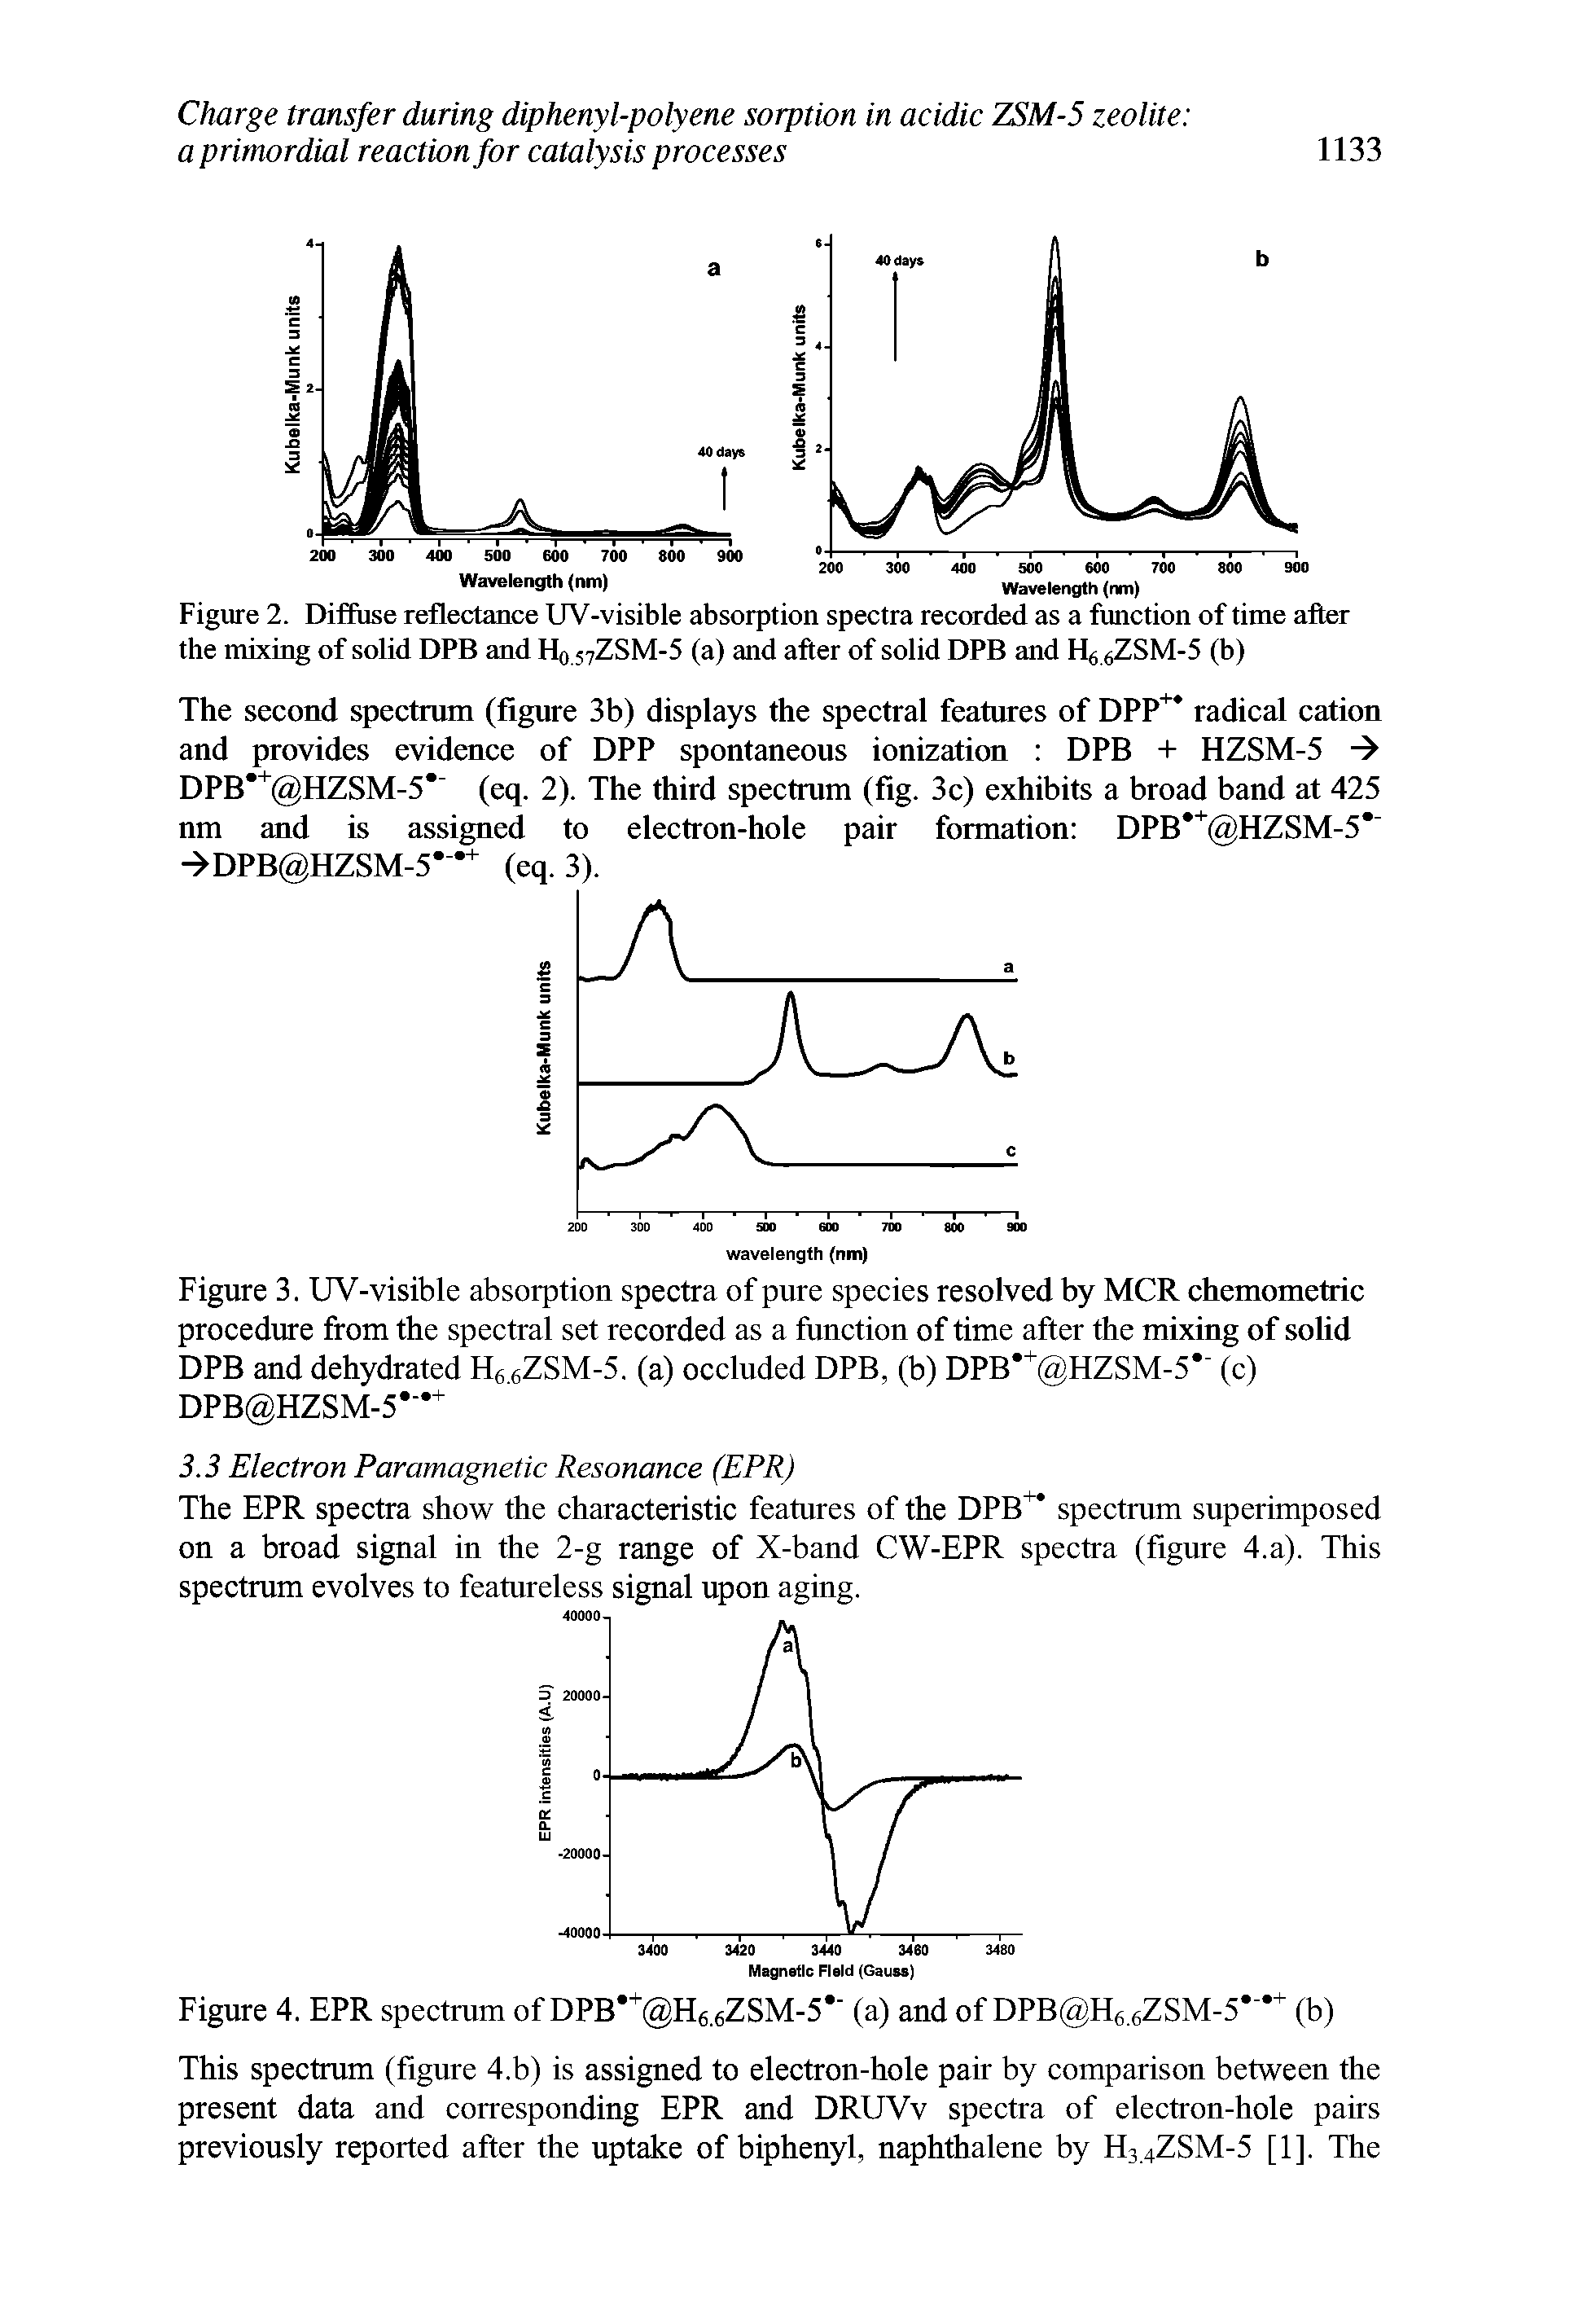 Figure 2. Diffuse reflectance UV-visible absorption spectra recorded as a function of time after the mixing of solid DPB and H0 57ZSM-5 (a) and after of solid DPB and H6 6ZSM-5 (b)...